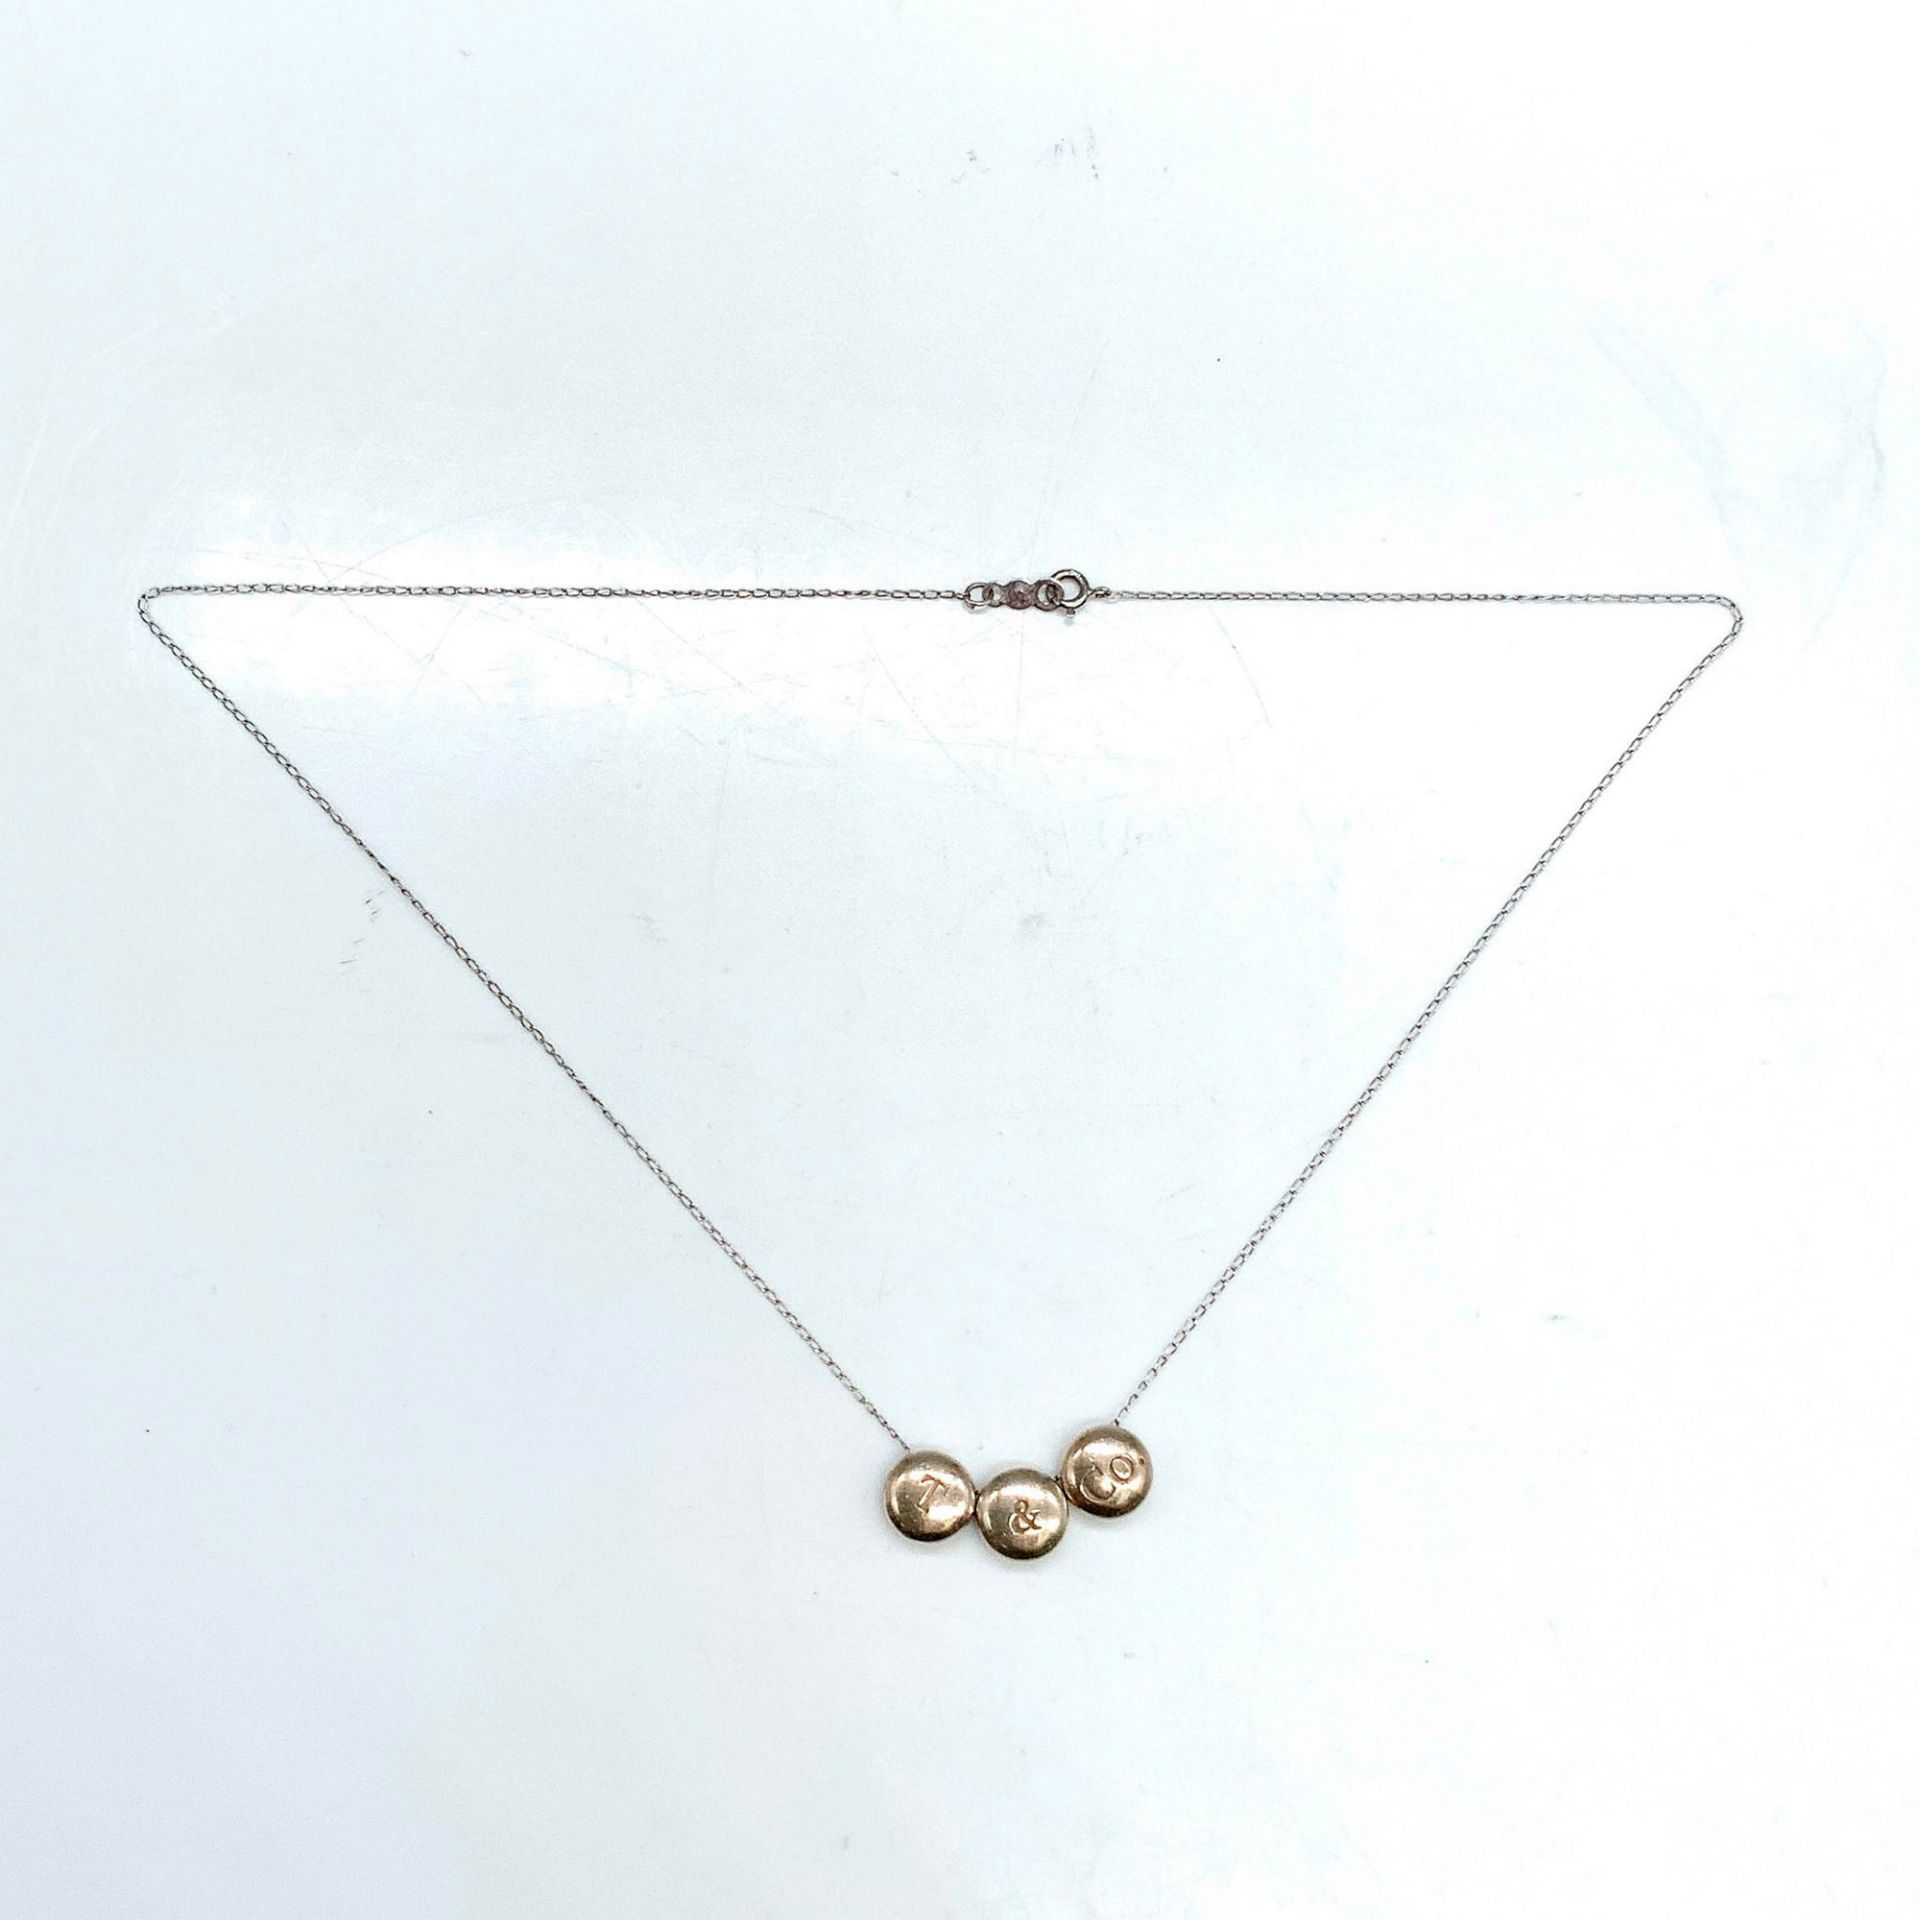 T & Co. Delicate 14K White Gold and Sterling Silver Necklace - Image 2 of 2